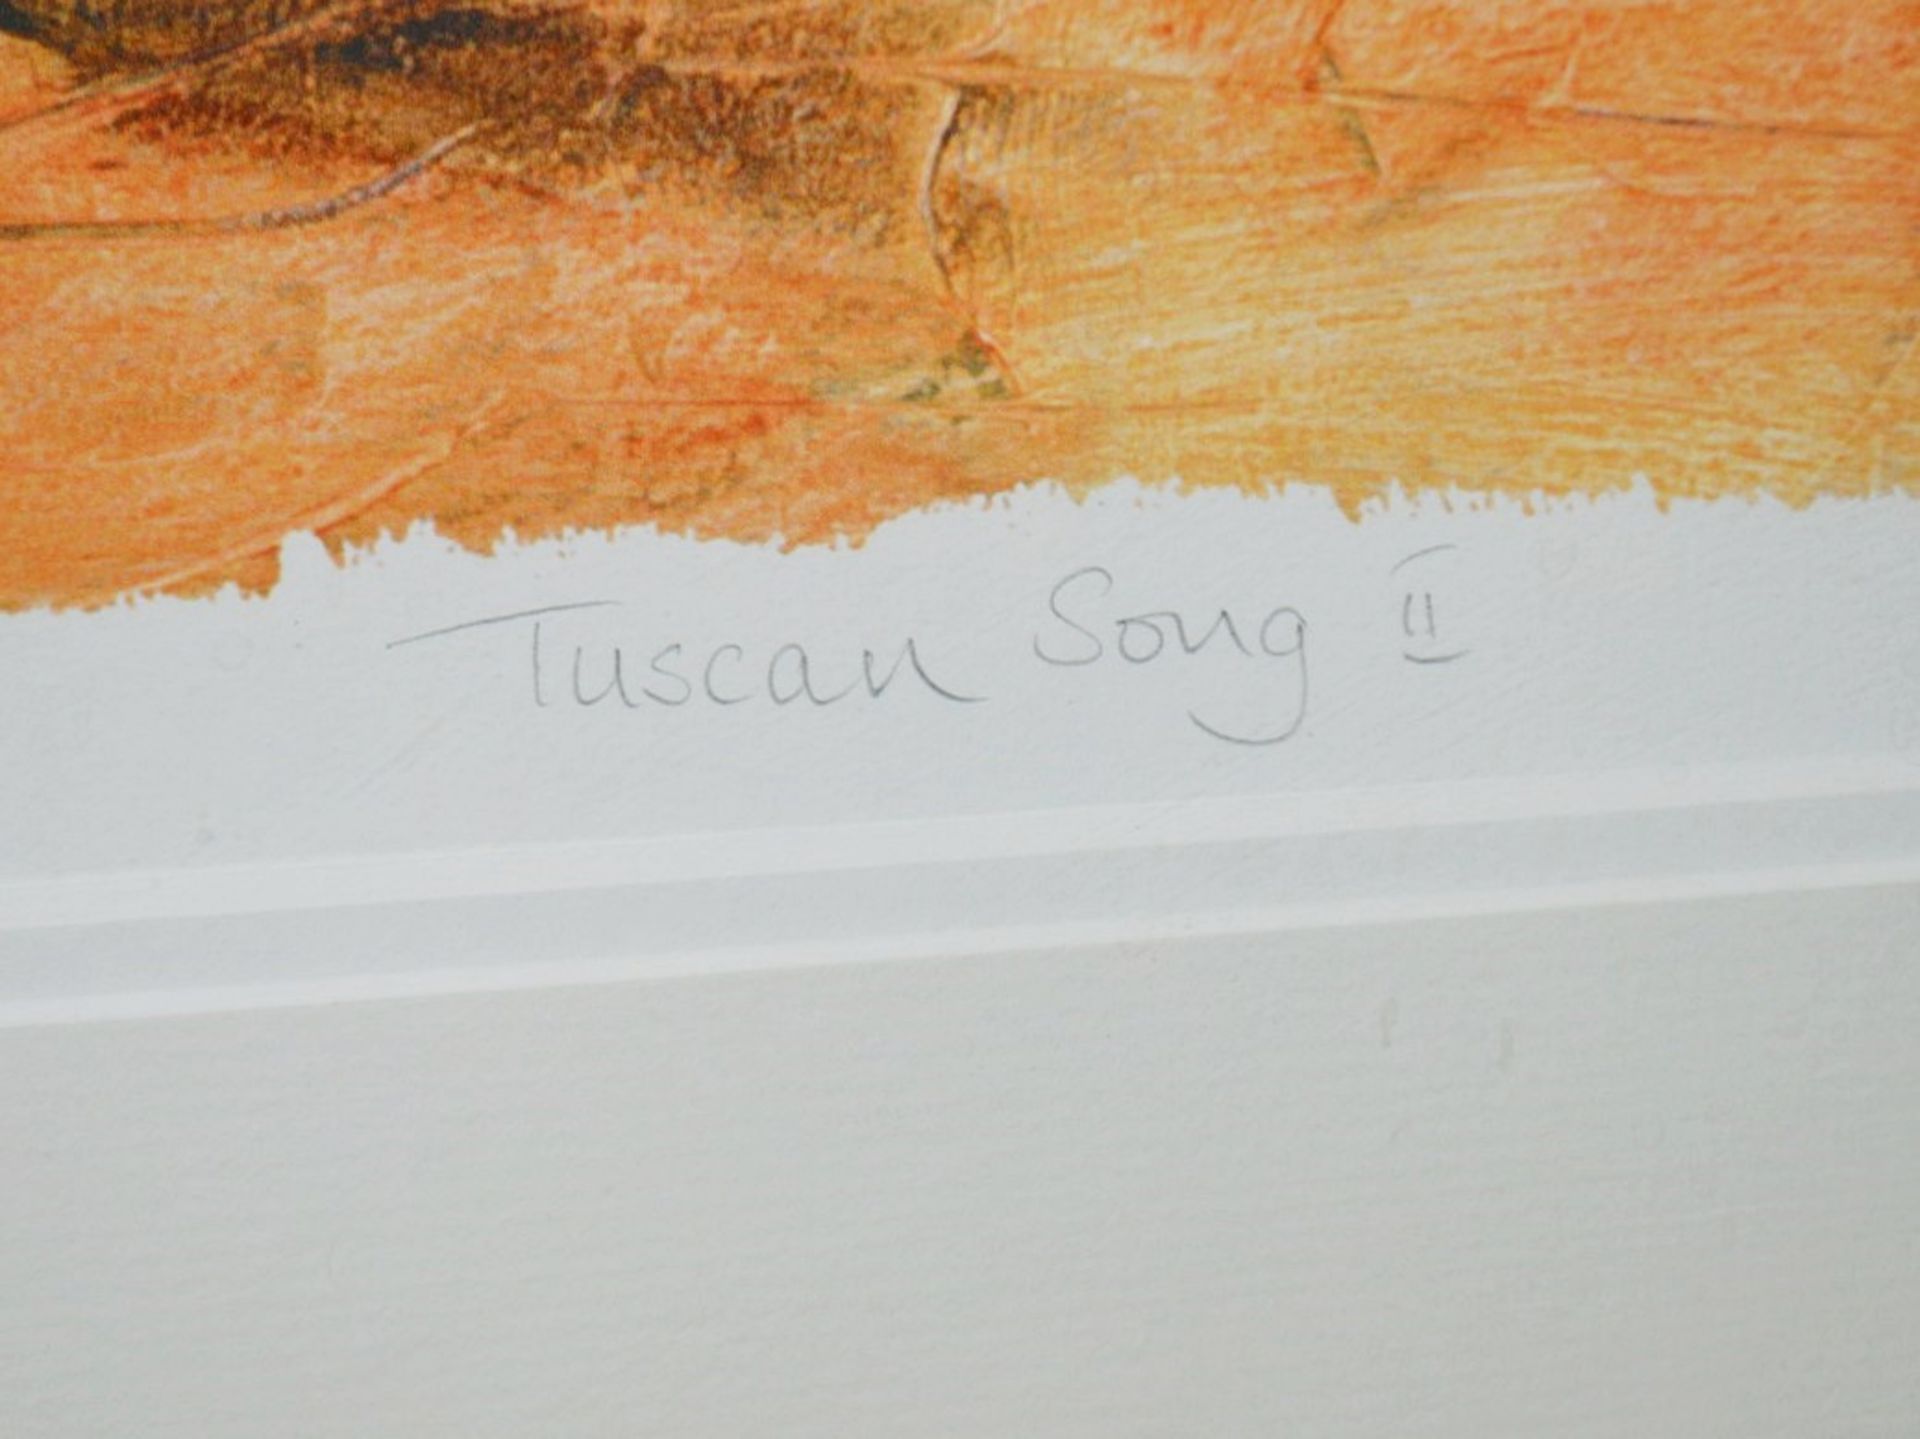 1 x Framed Limited Edition Art Print 'Tuscan Song II' By RICHARD PARGETER - Signed And Mounted - - Image 3 of 6